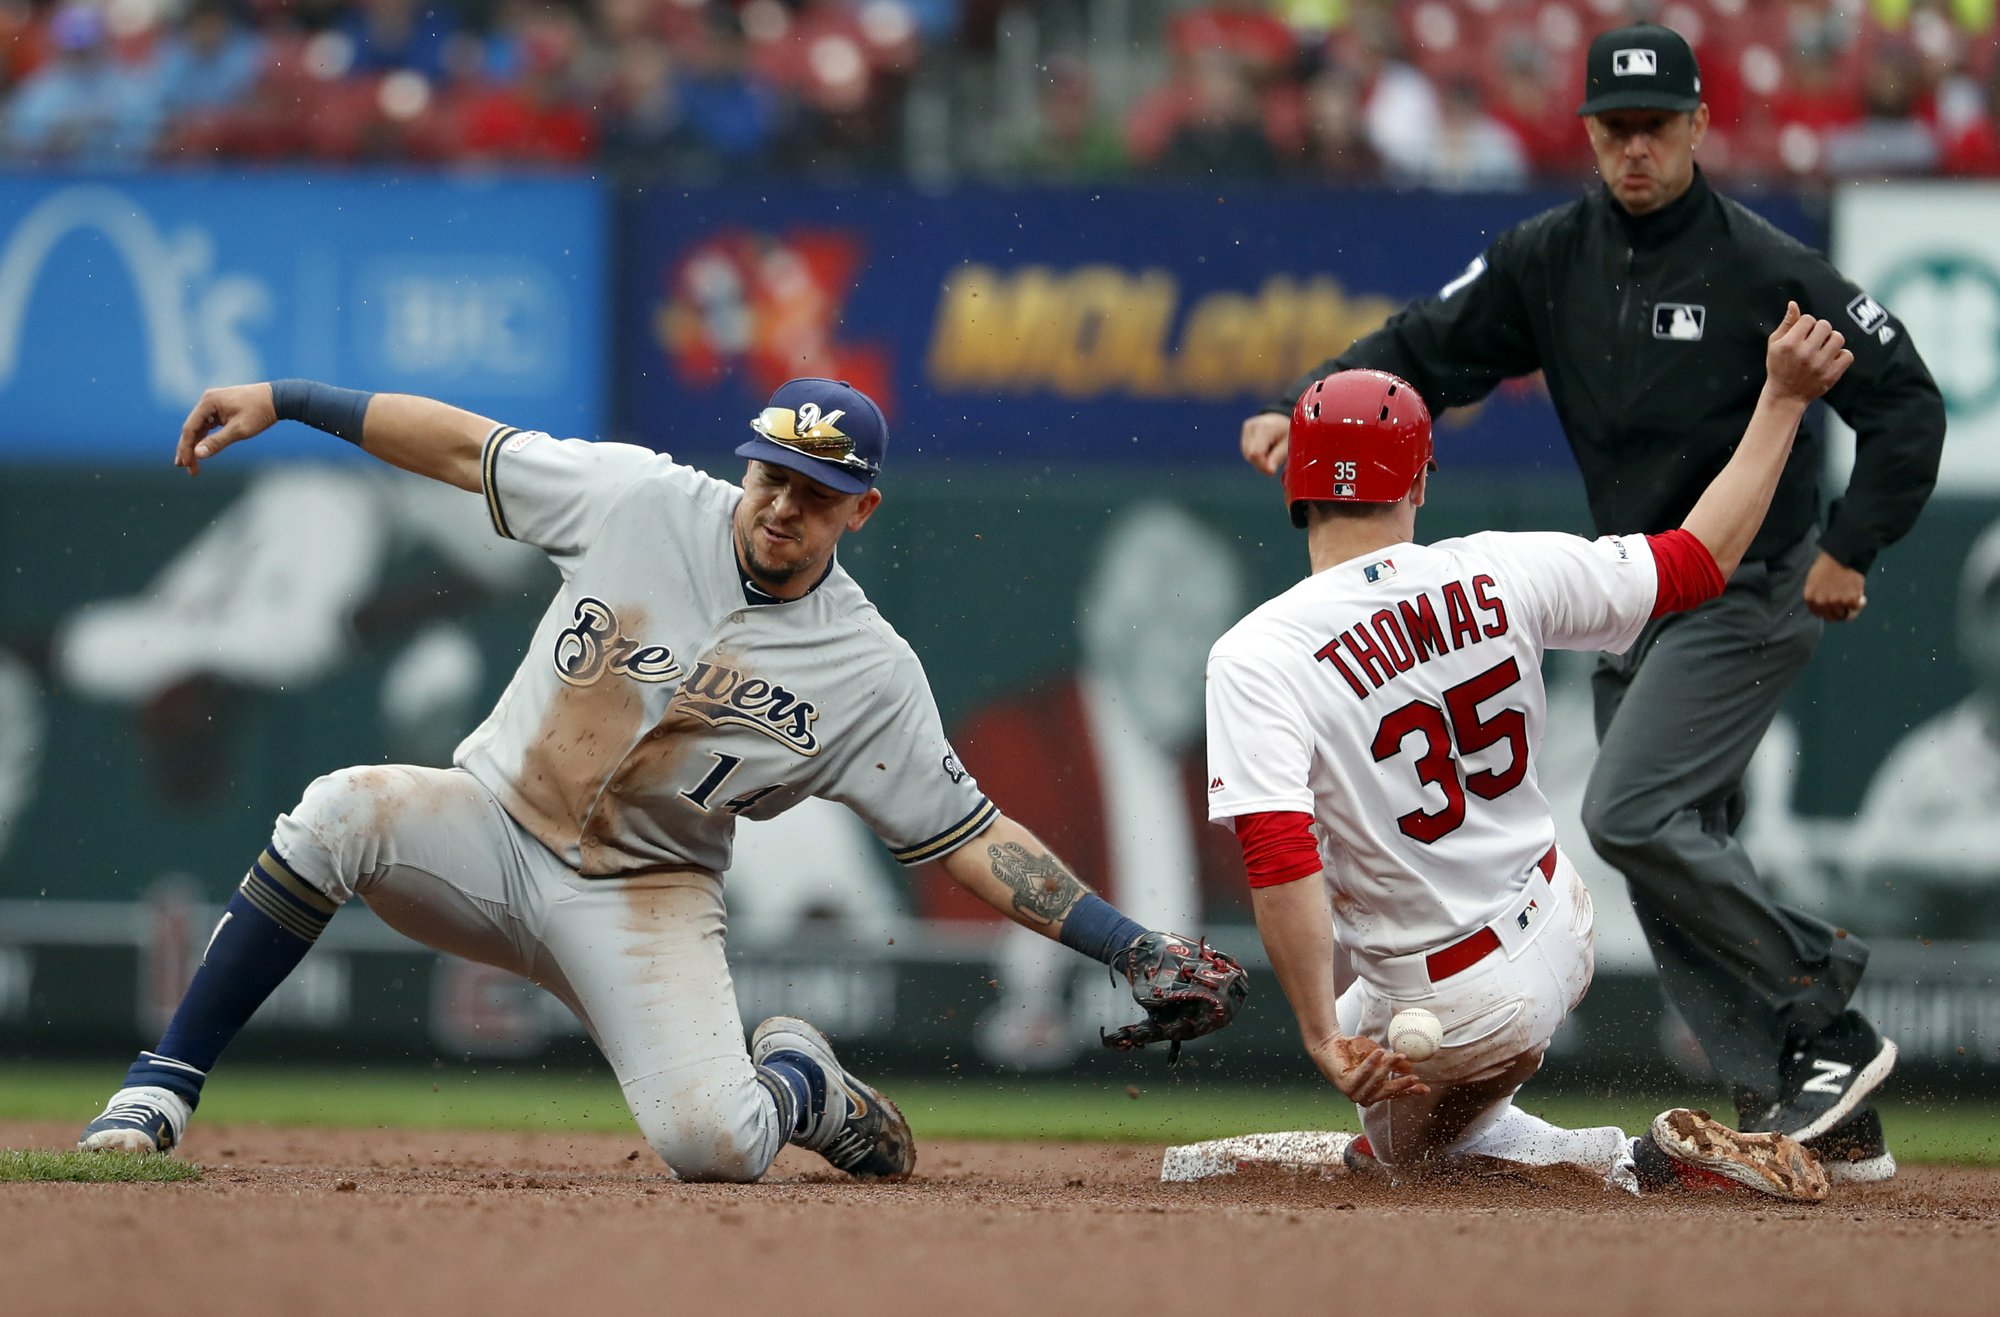 Wainwright heats up, Cards beat Brewers, who have lost 7 of 8